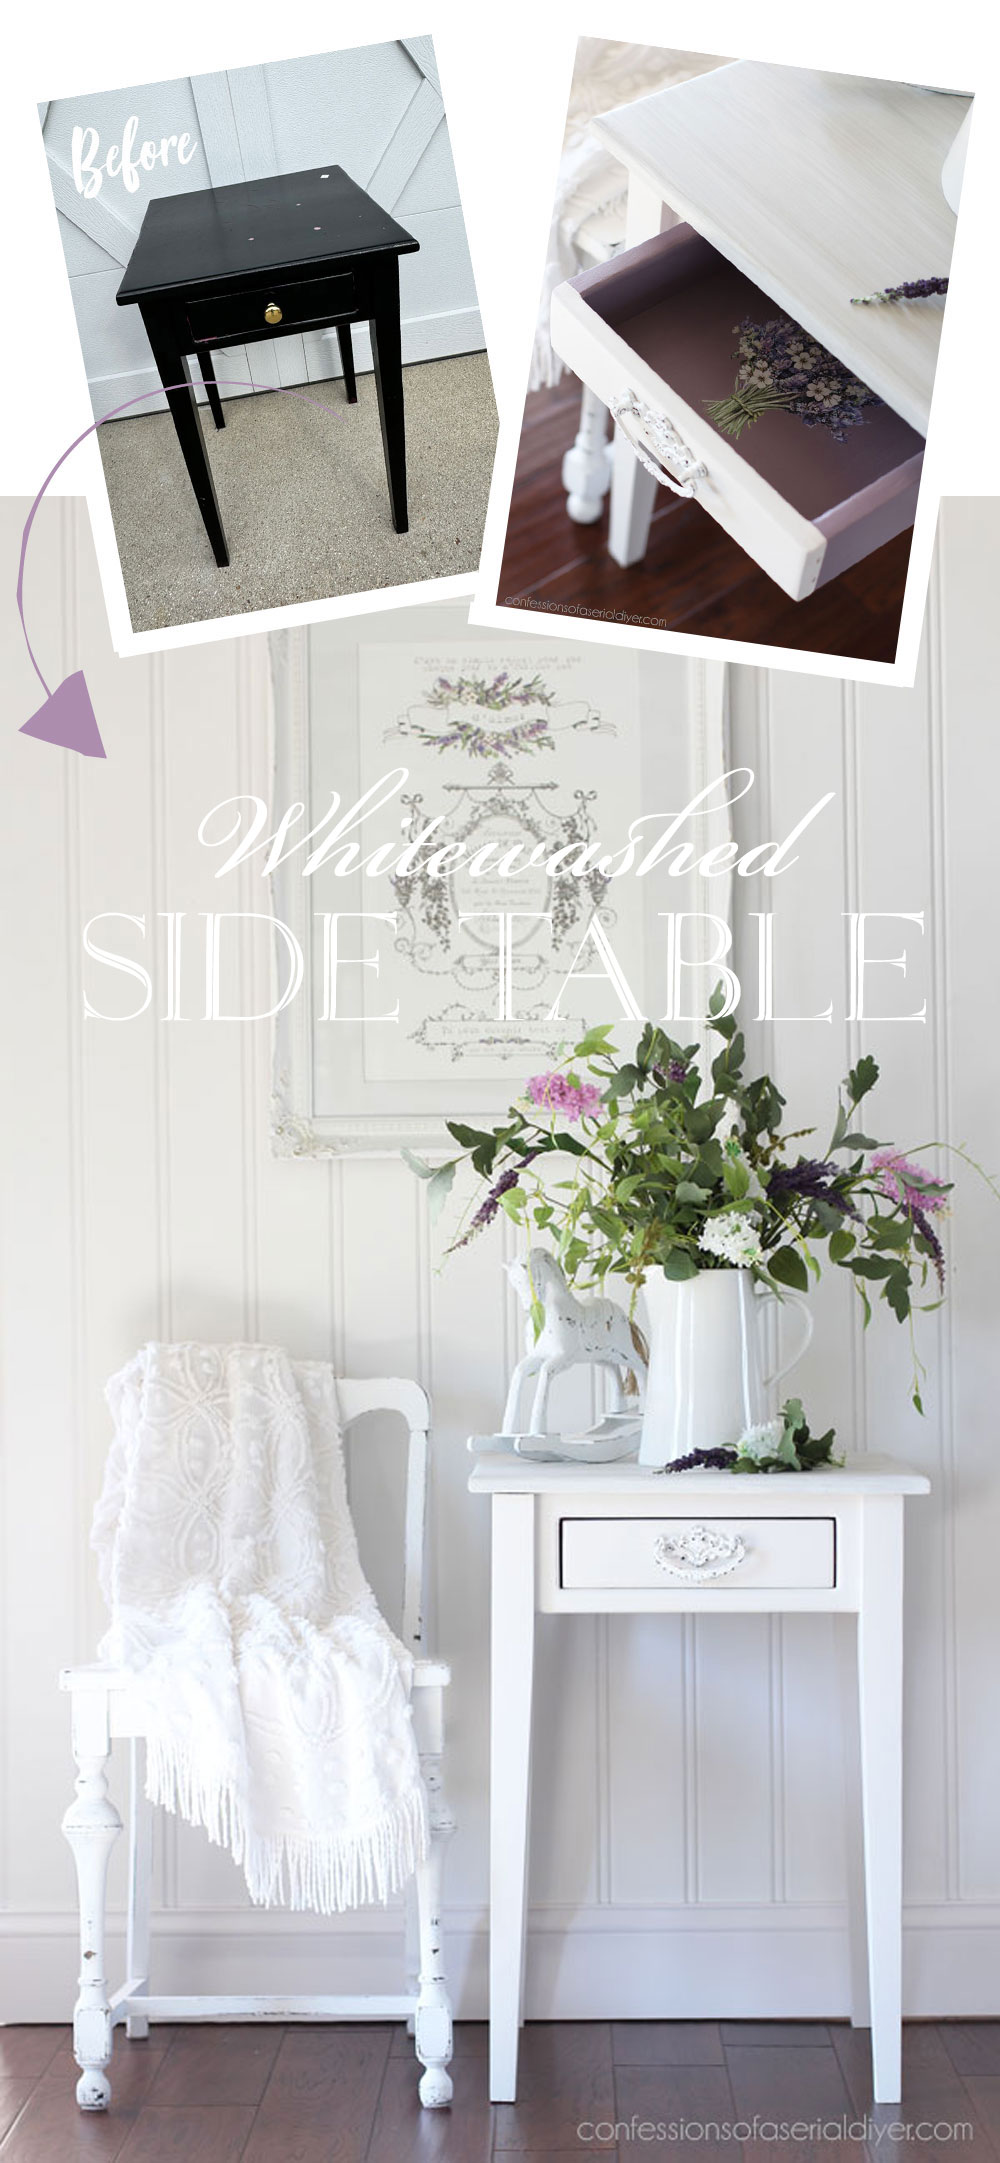 Whitewashed side table